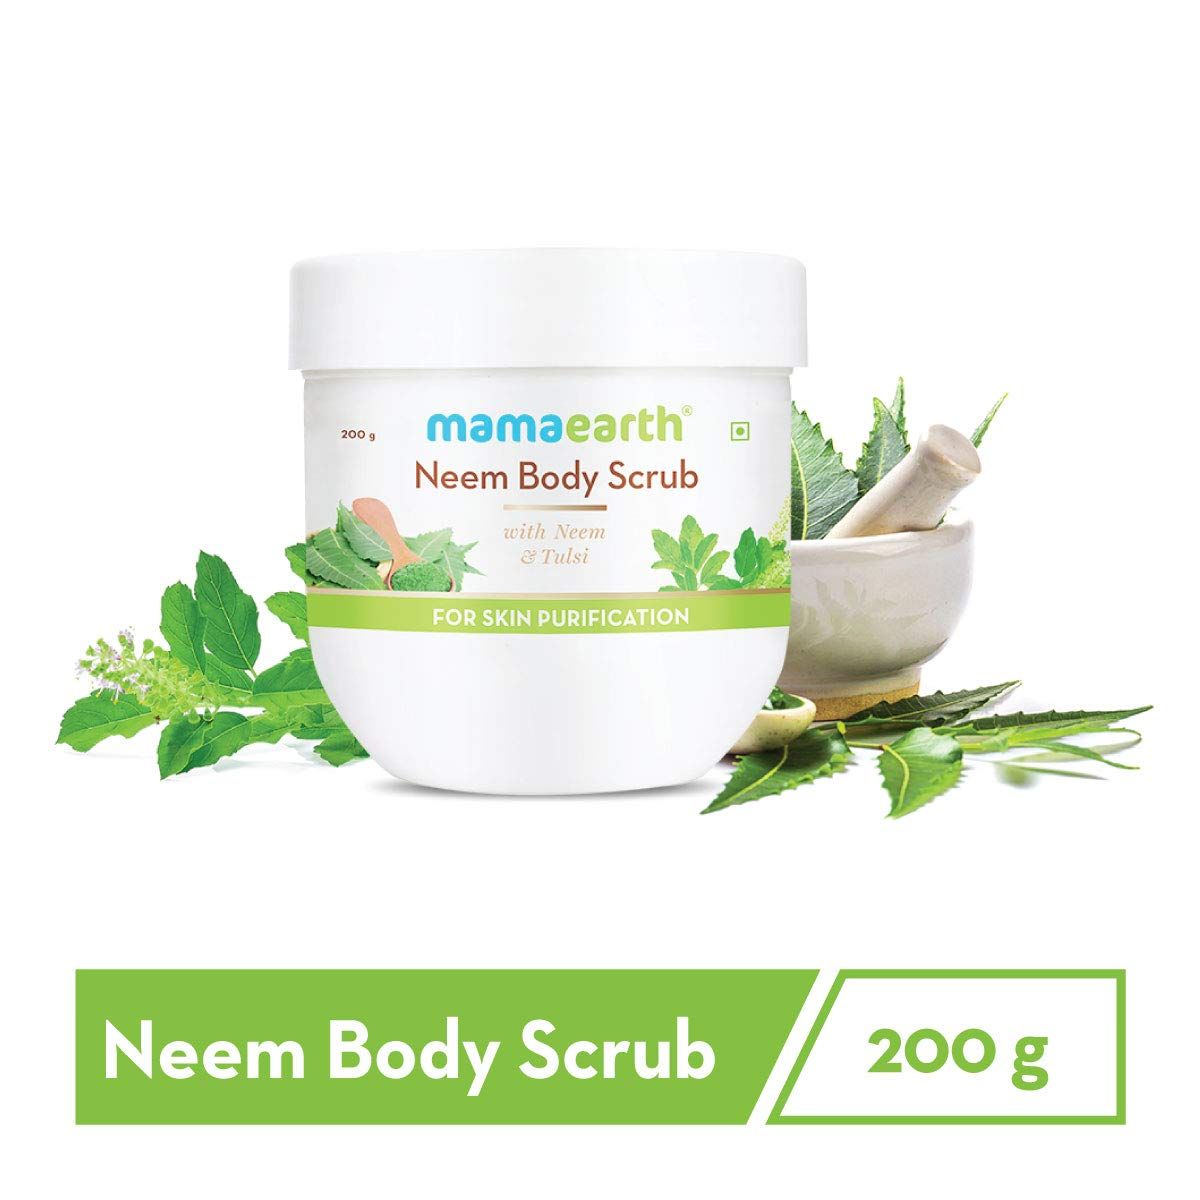 Neem Body Scrub with Neem and Tulsi for Skin Purification - 200 g